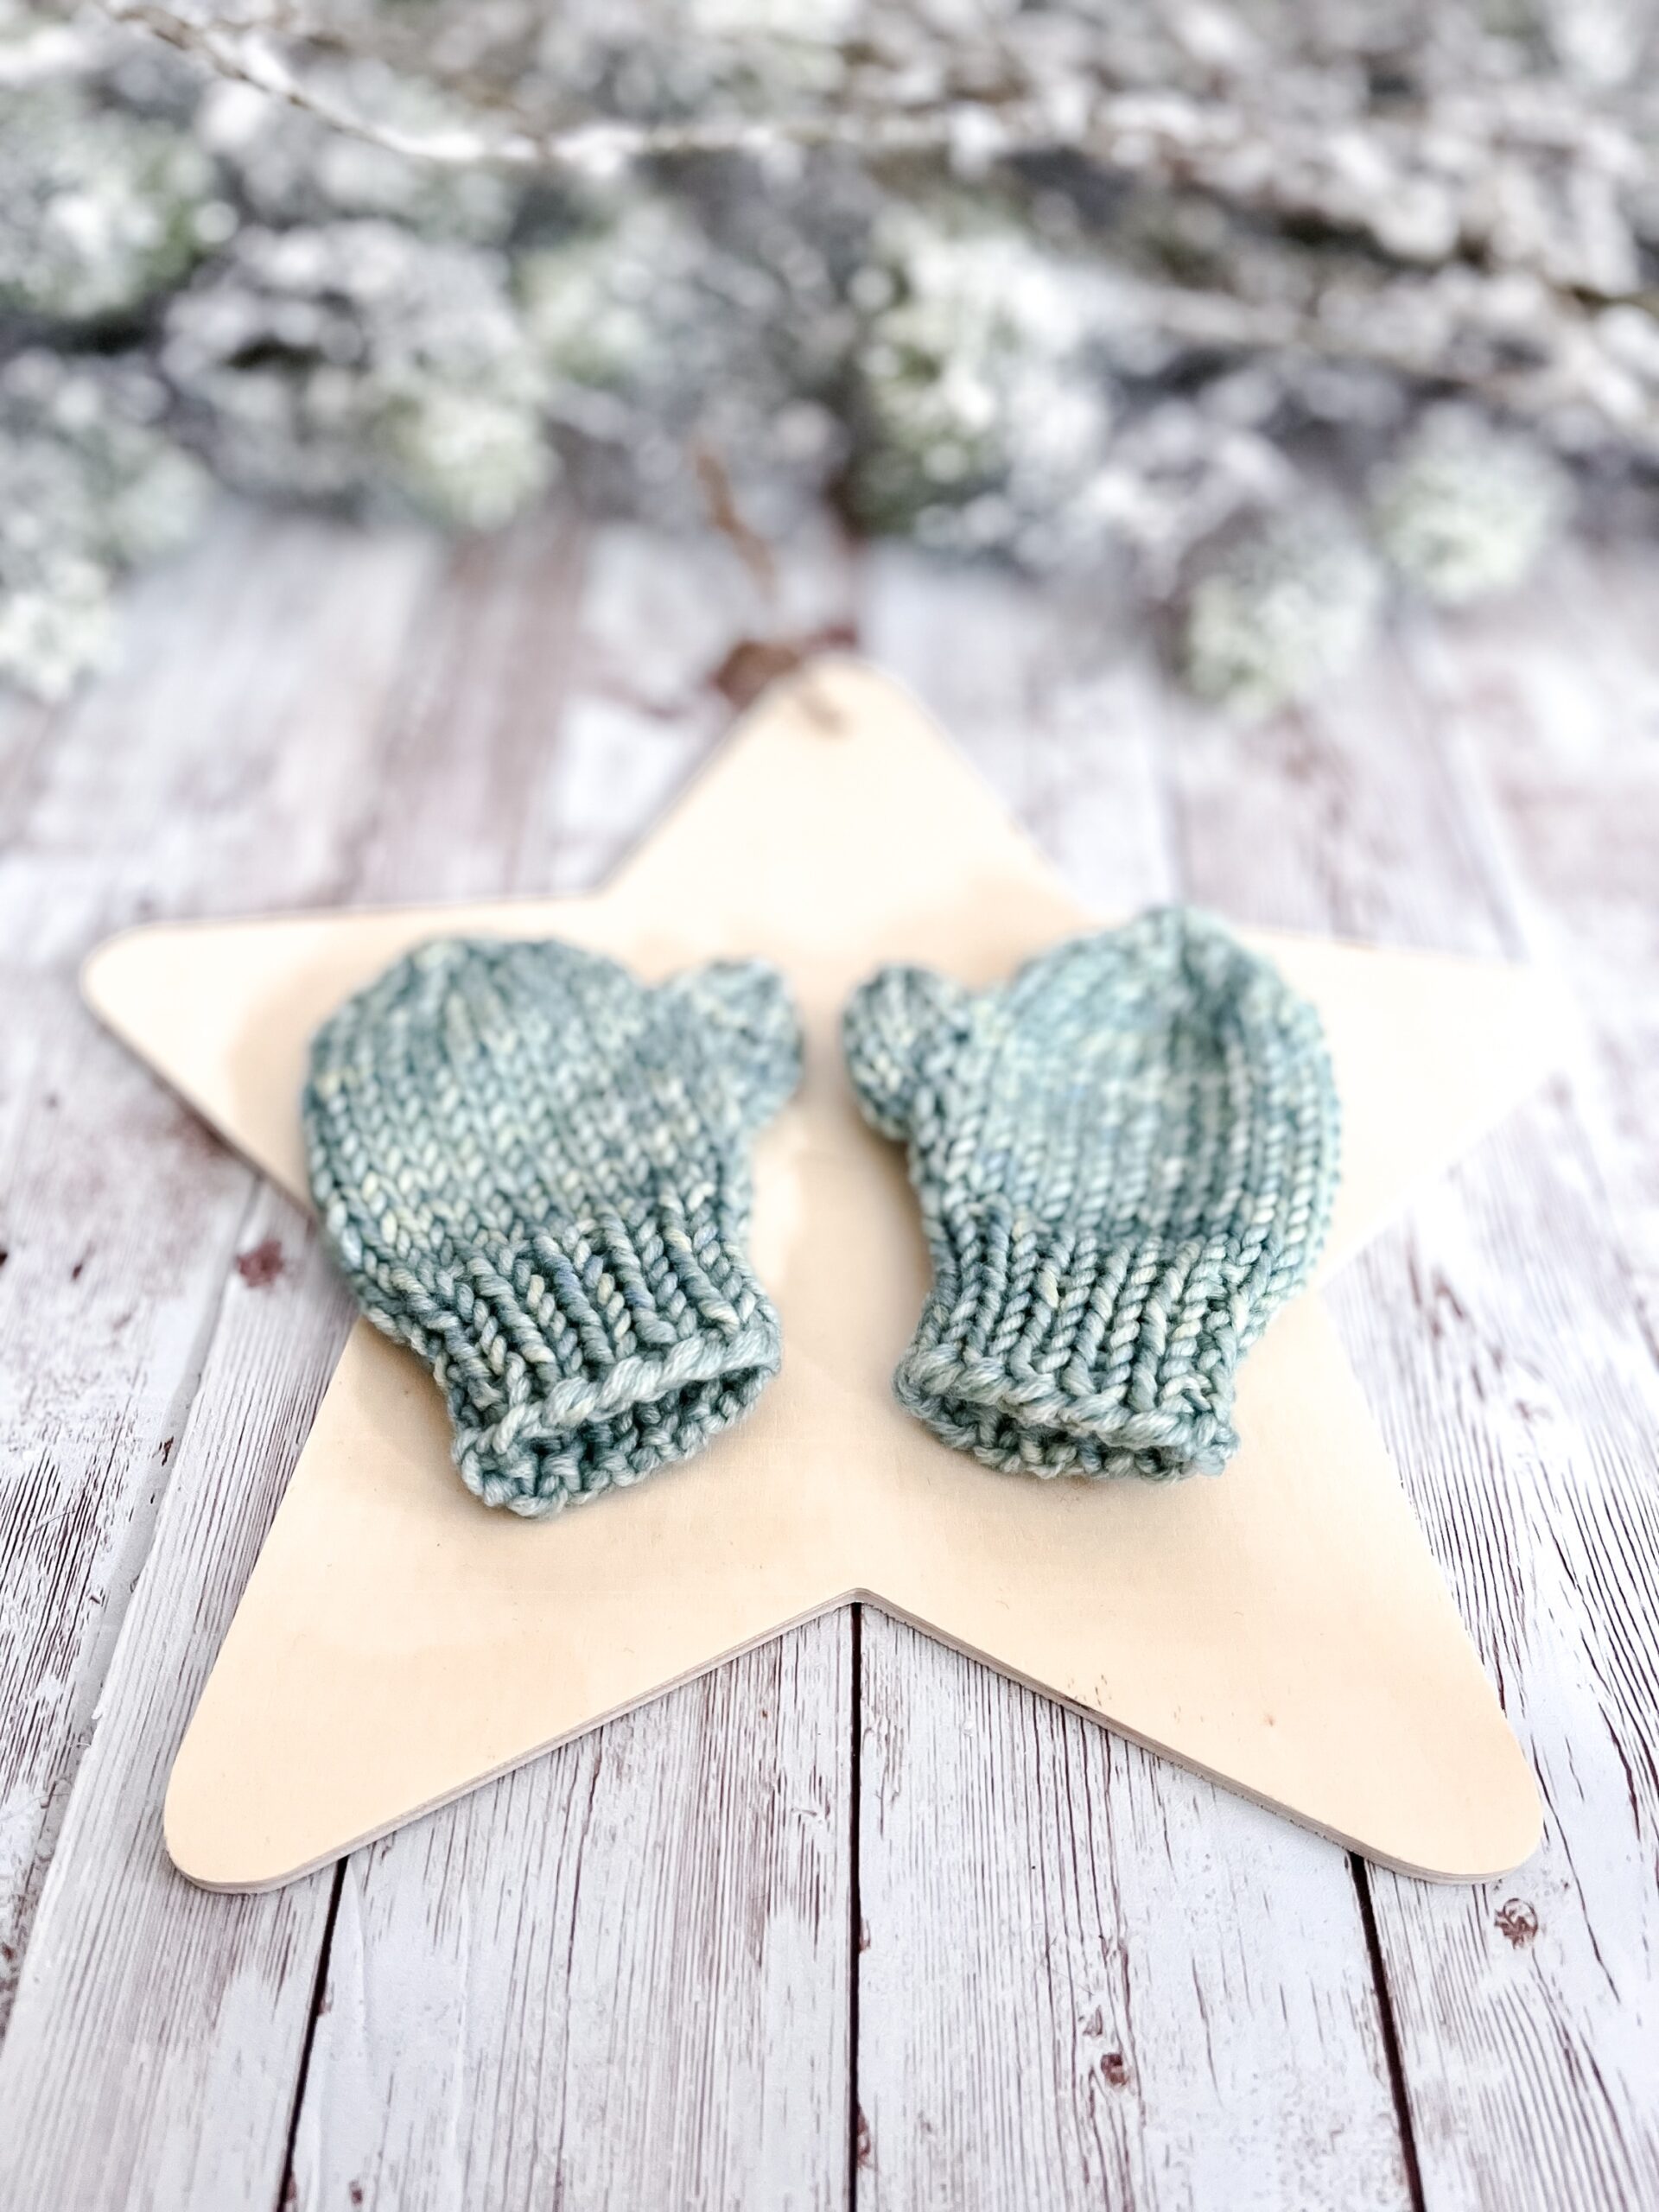 A pair of light green colored mittens rests on a wooden star cutout on a wood plank background. In the background of the photo is snow covered pine branches